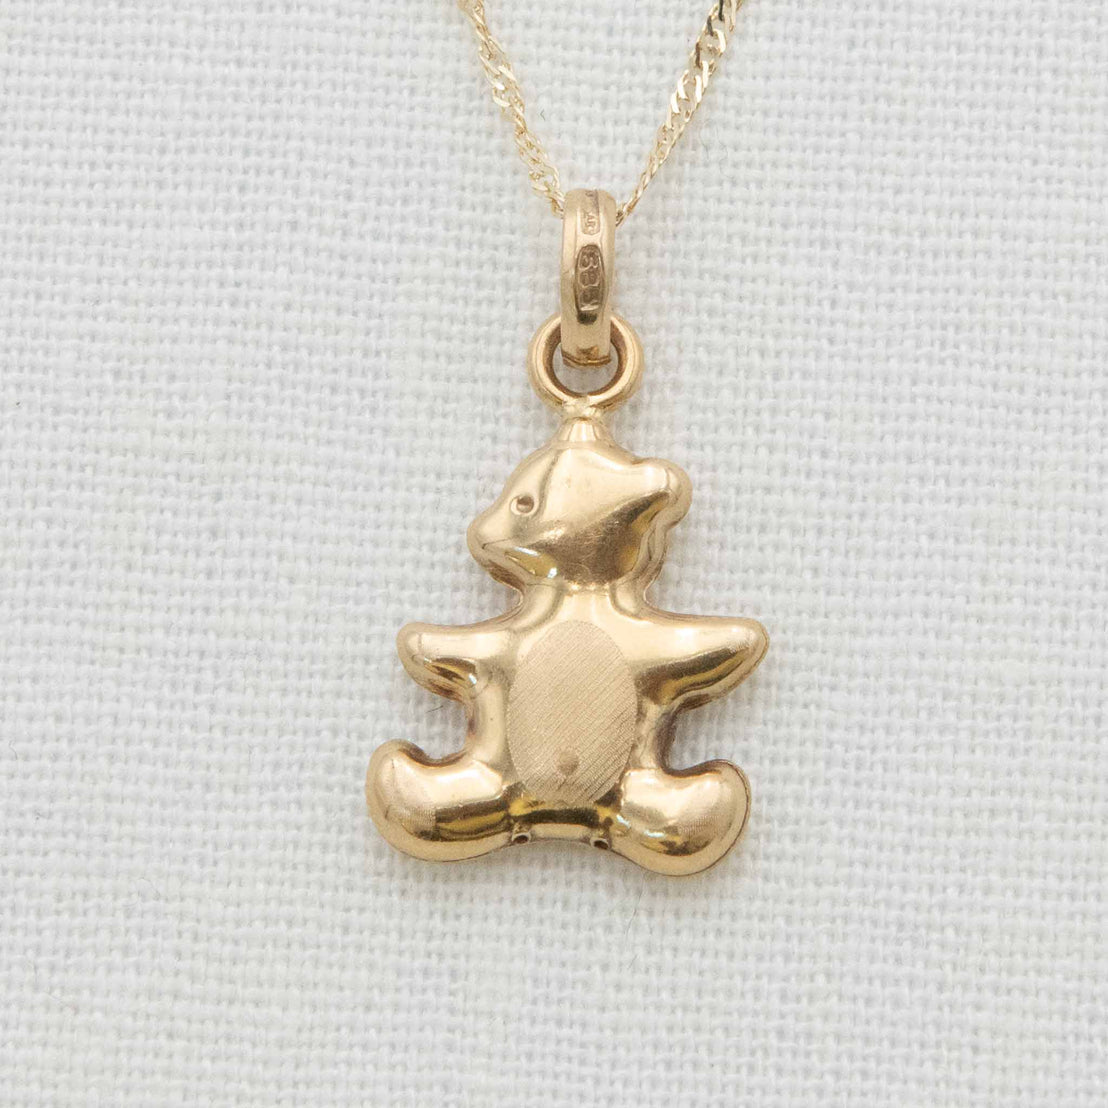 Solid gold teddy bear charm necklace